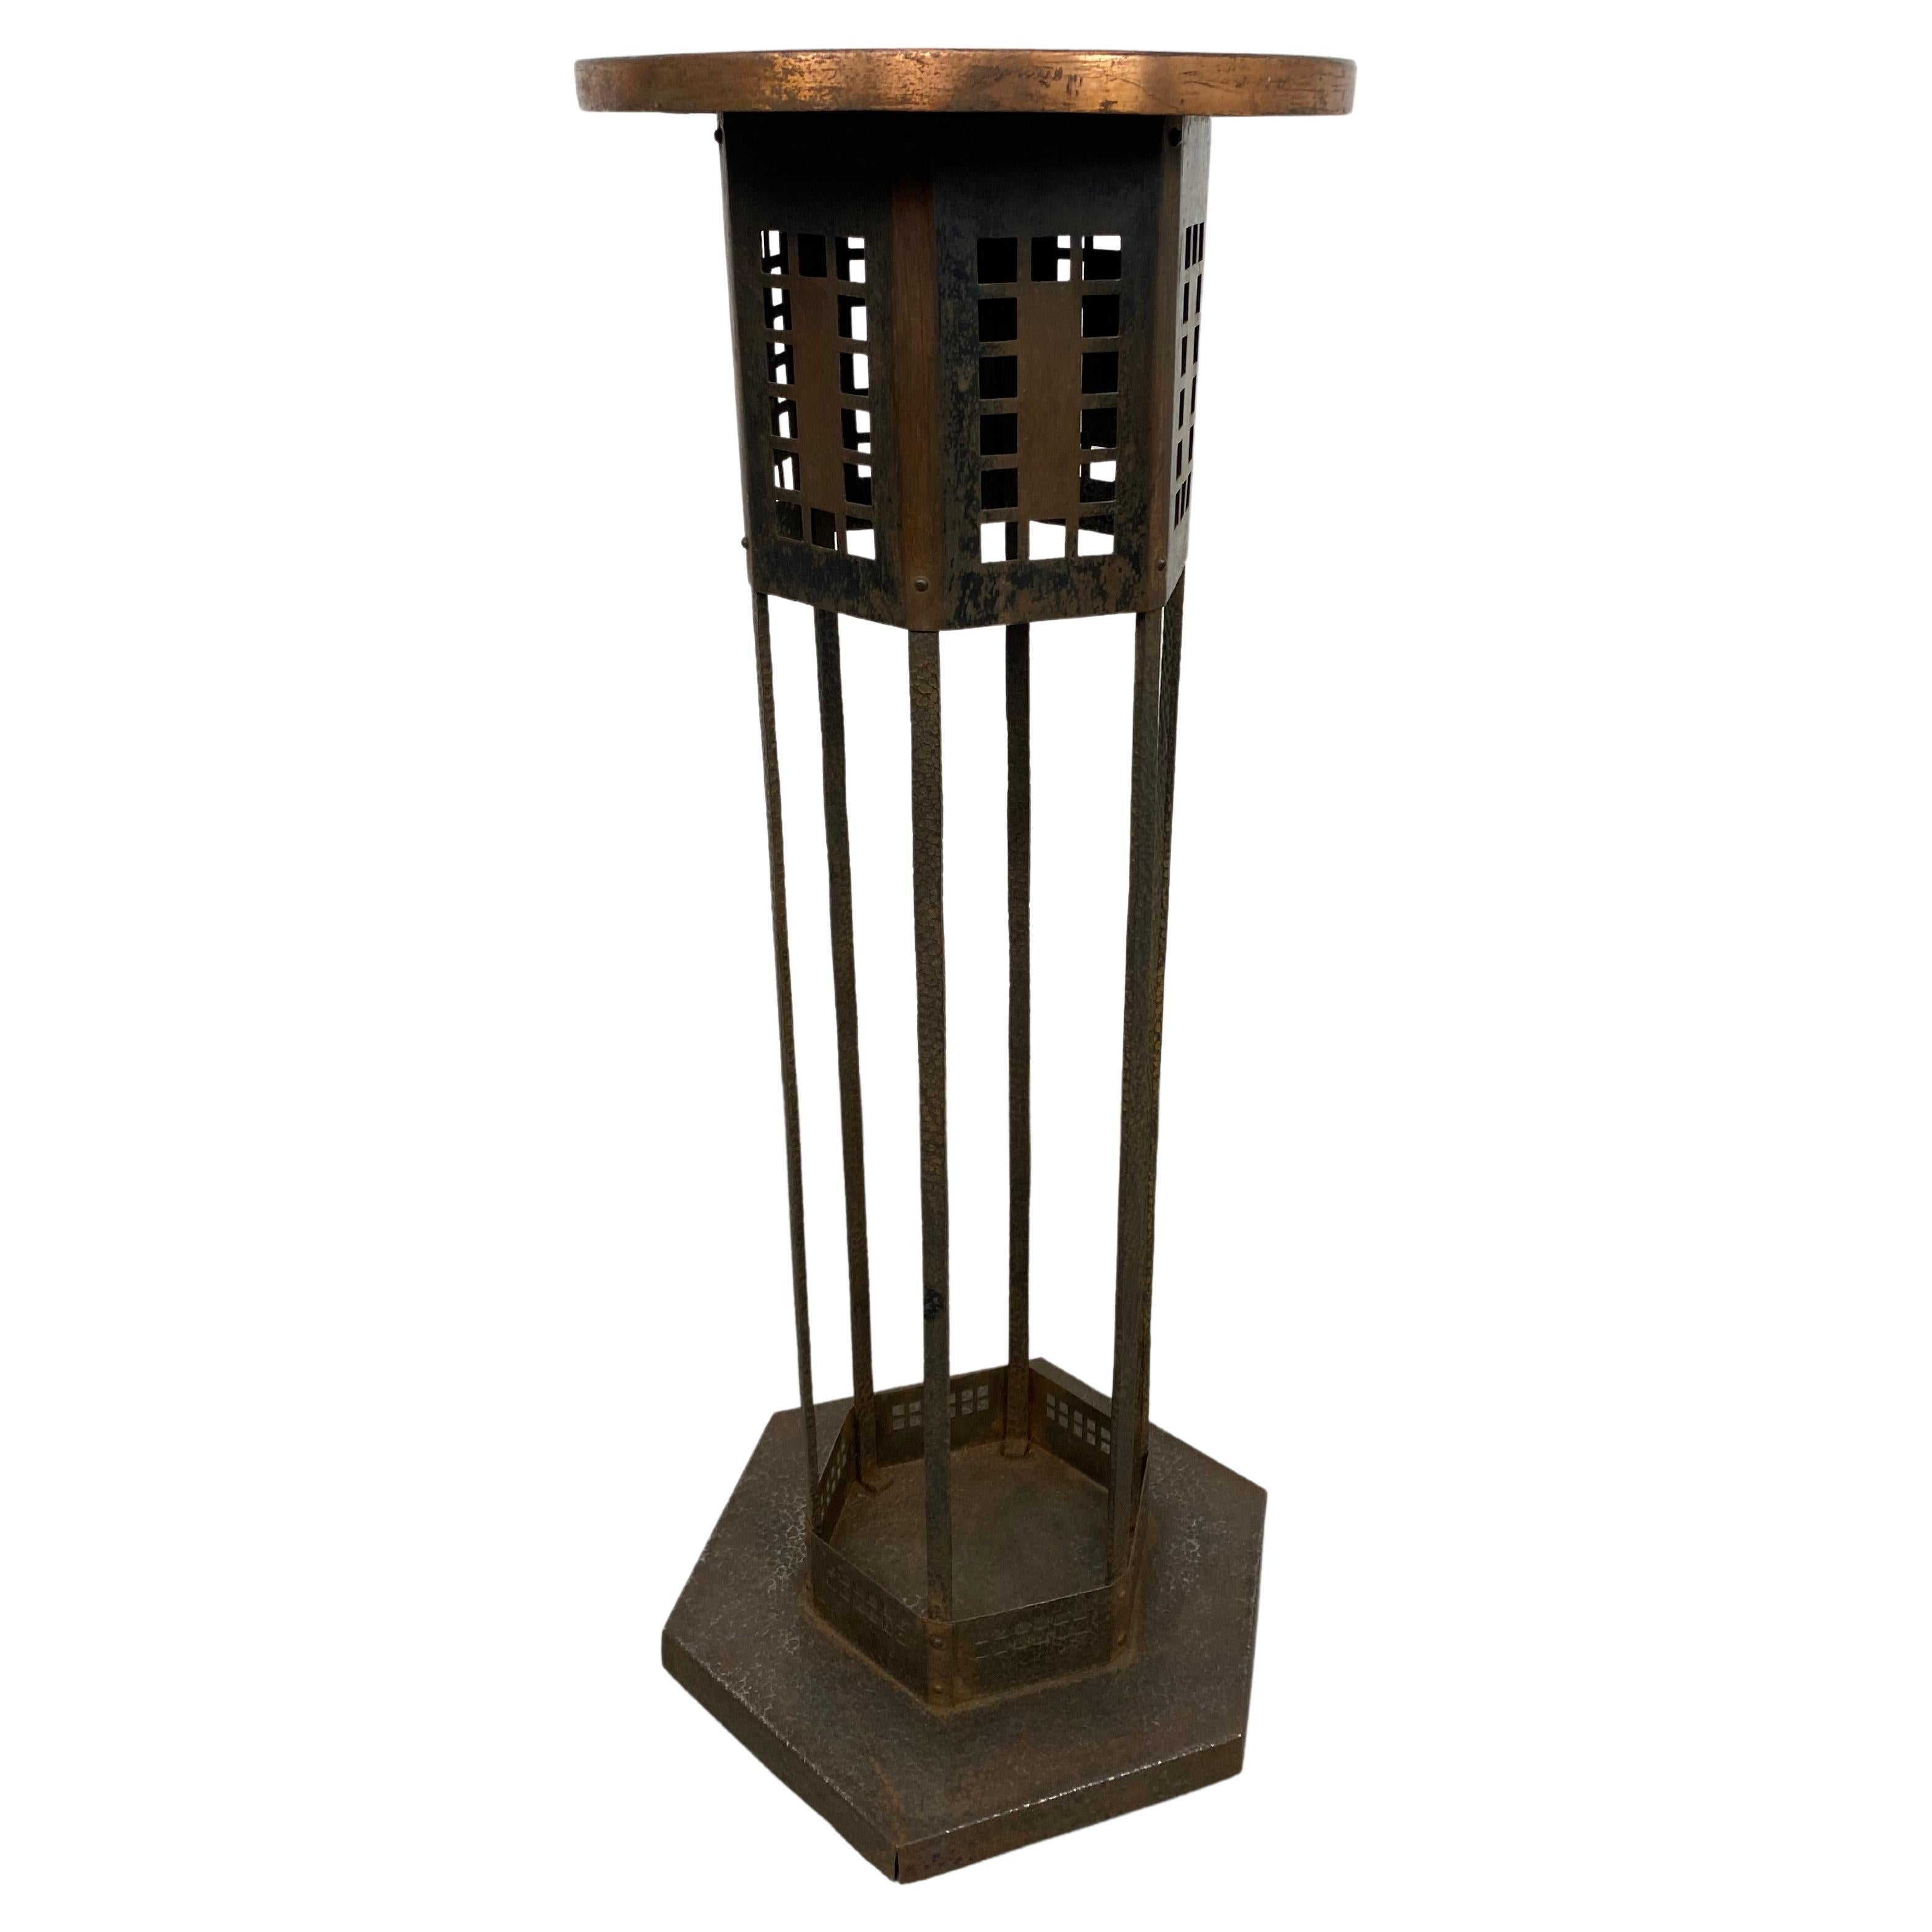 Secession Plant Stand in Style of Wiener Werkstatte